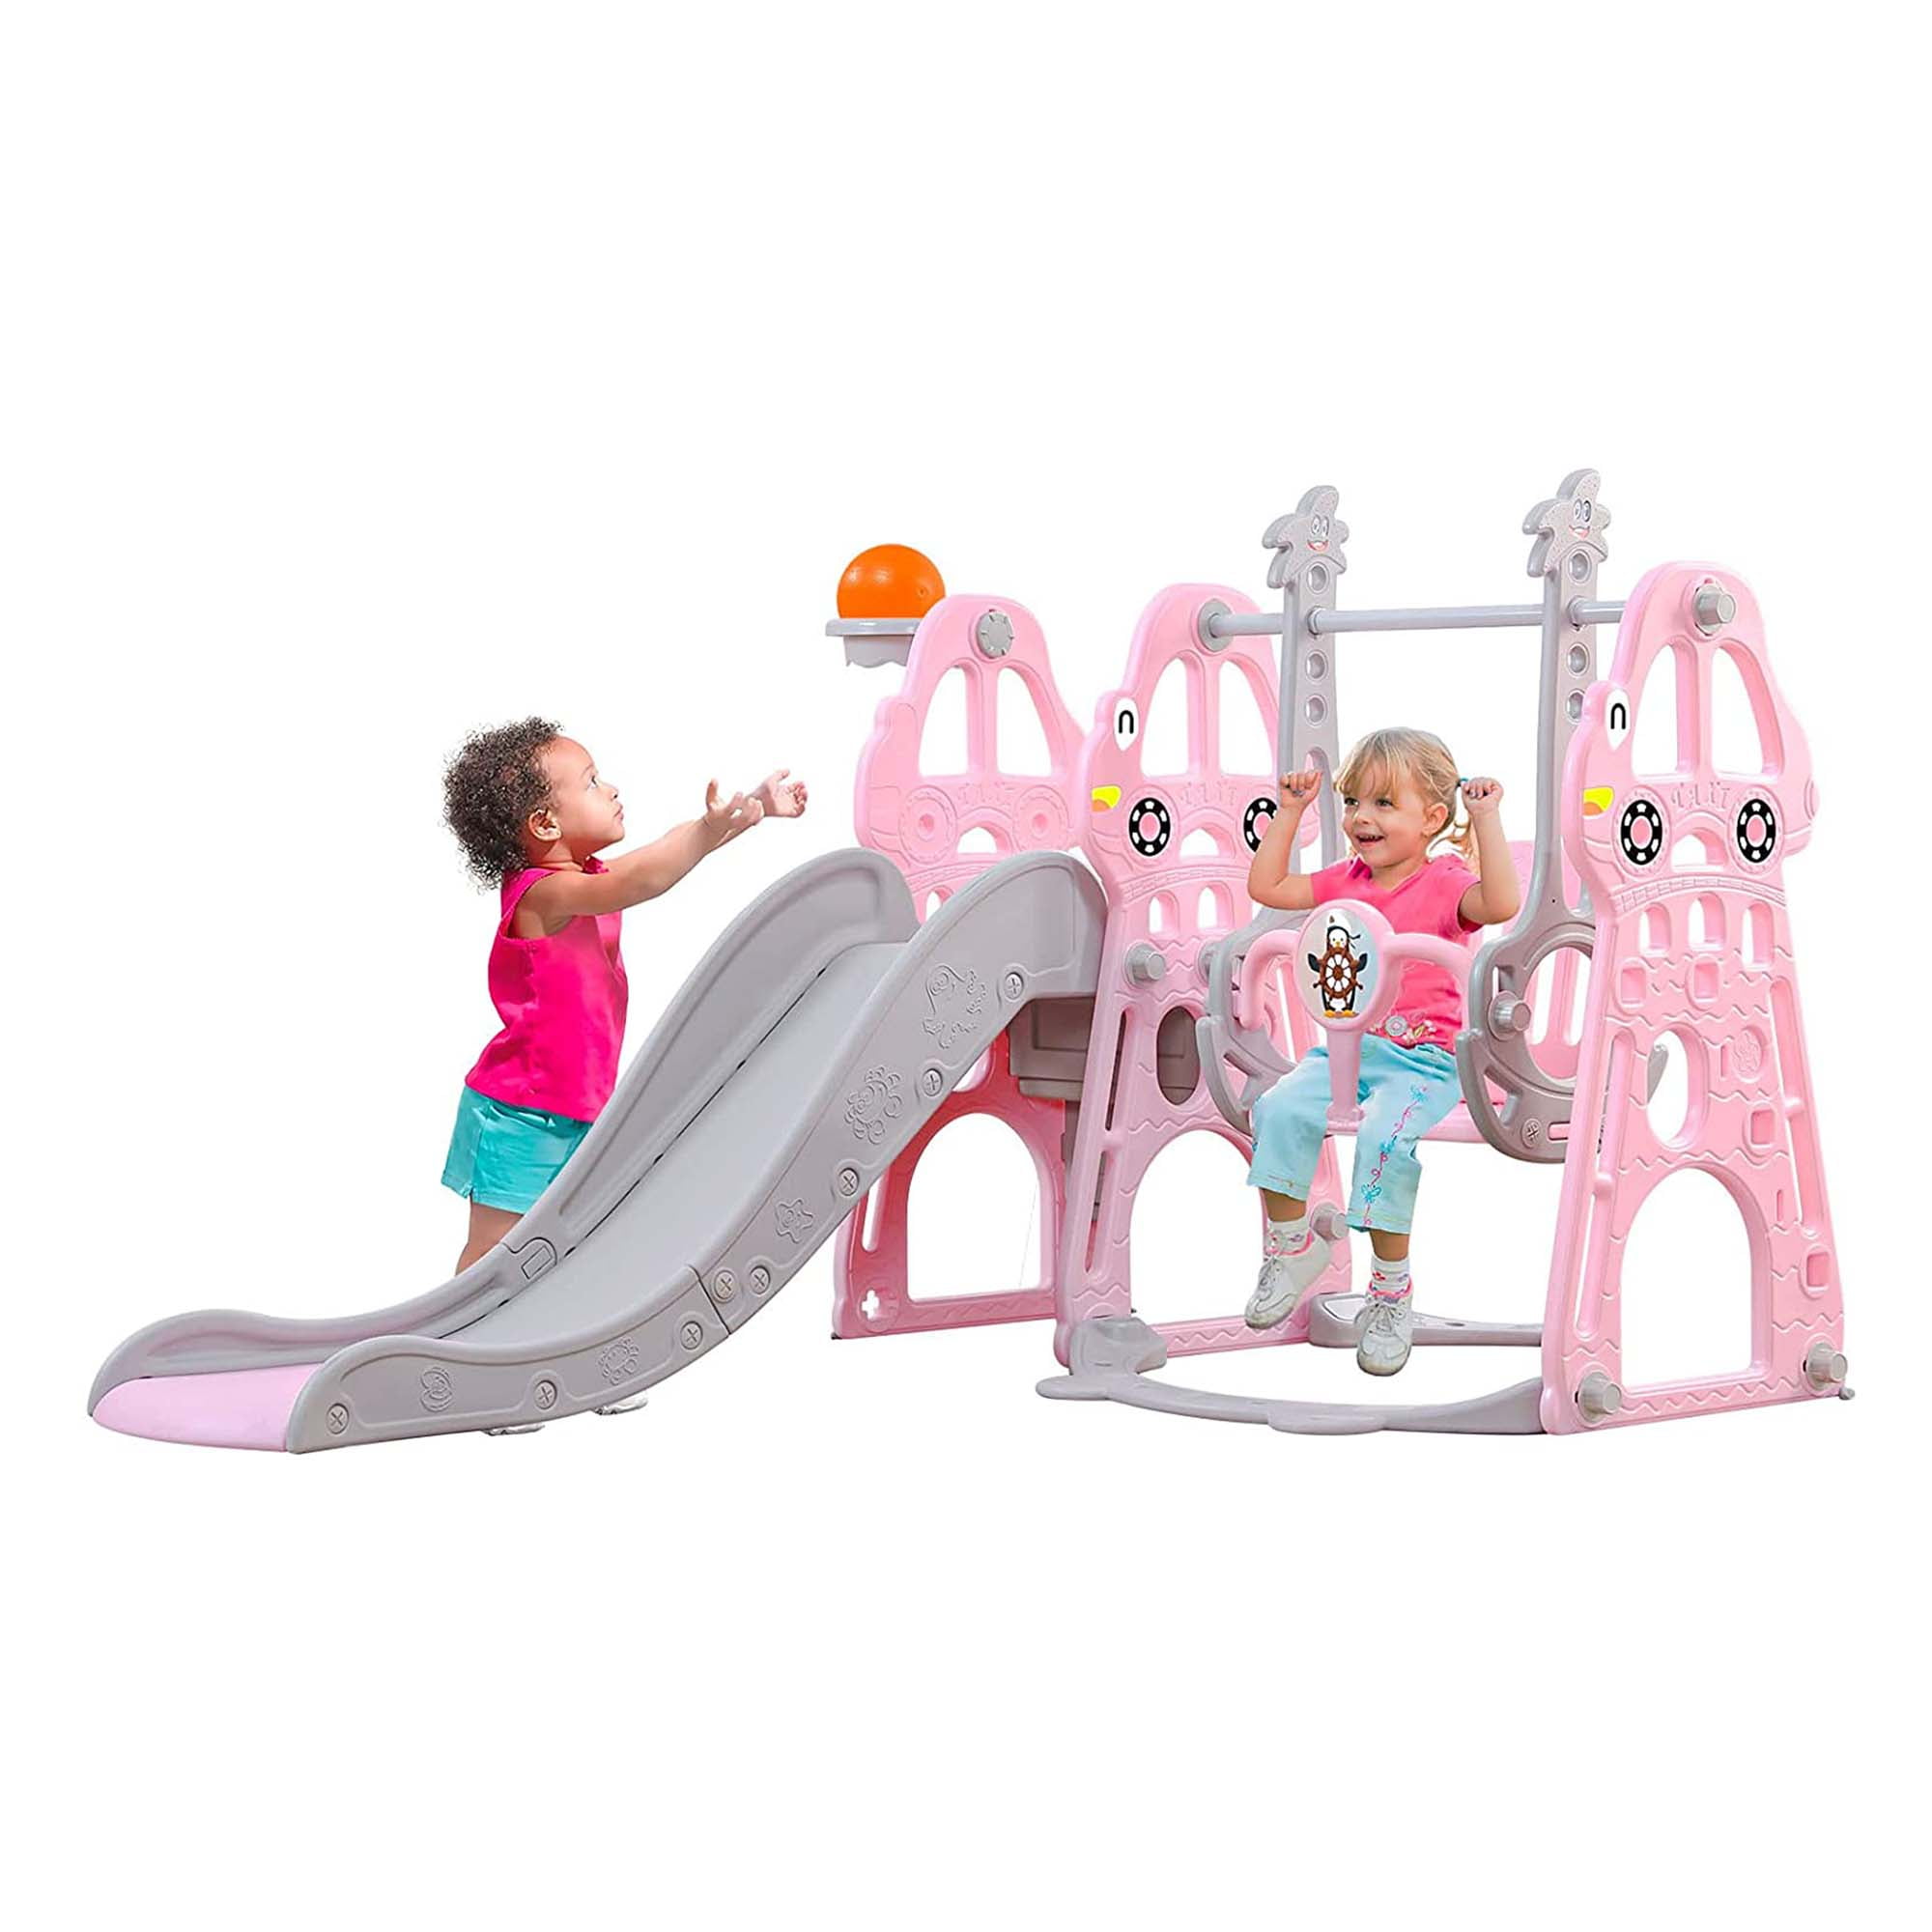 Details about   Chad Valley 4ft Kids Slide Indoor Child Toddler Activity Fun Pink CHRISTMAS GIFT 